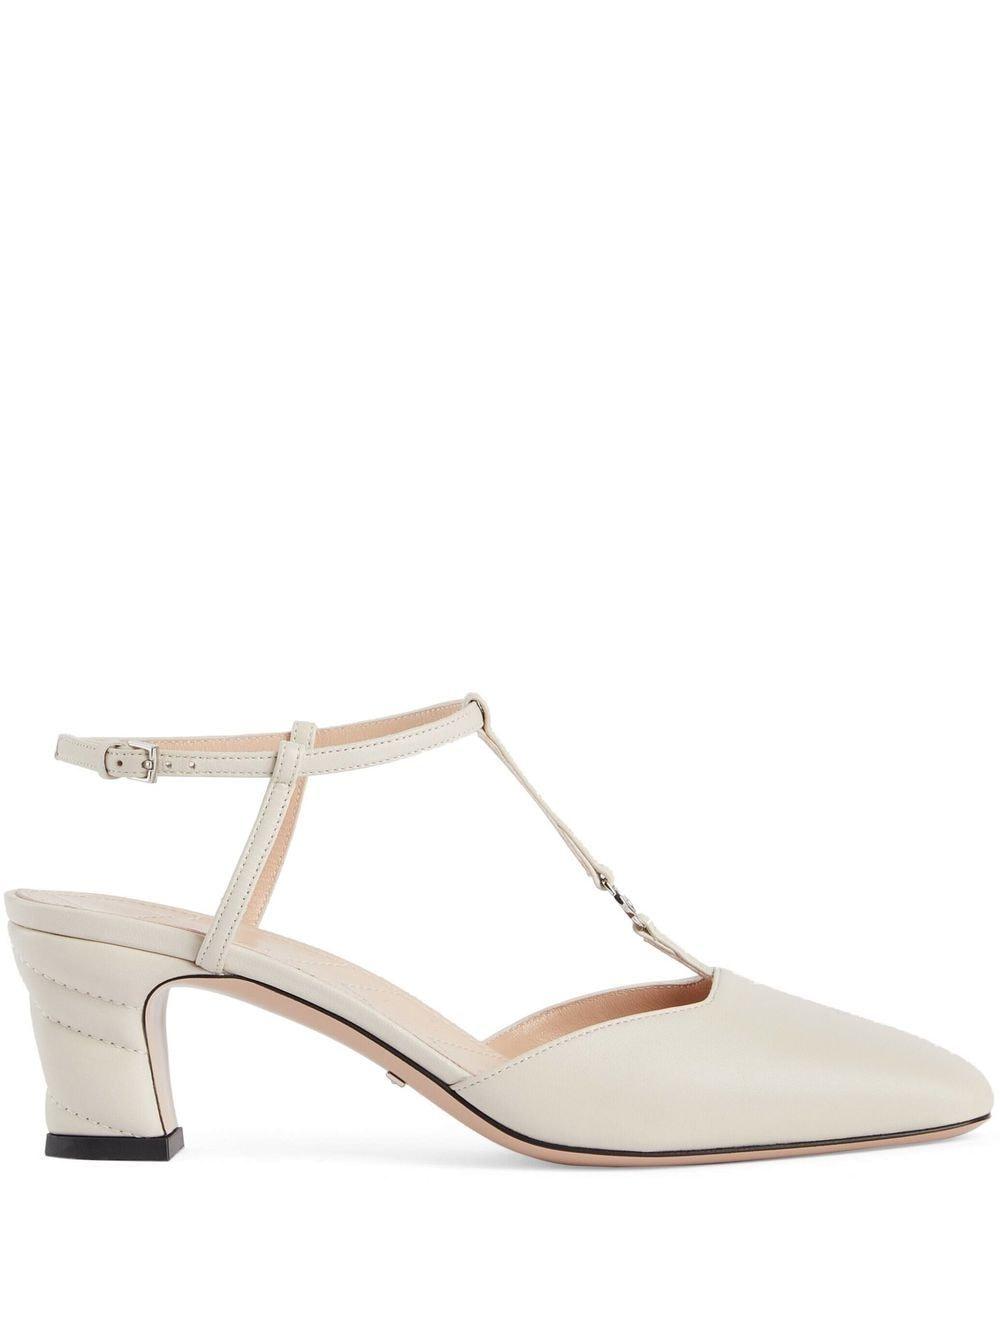 Gucci Double G T-bar Pumps in White | Lyst